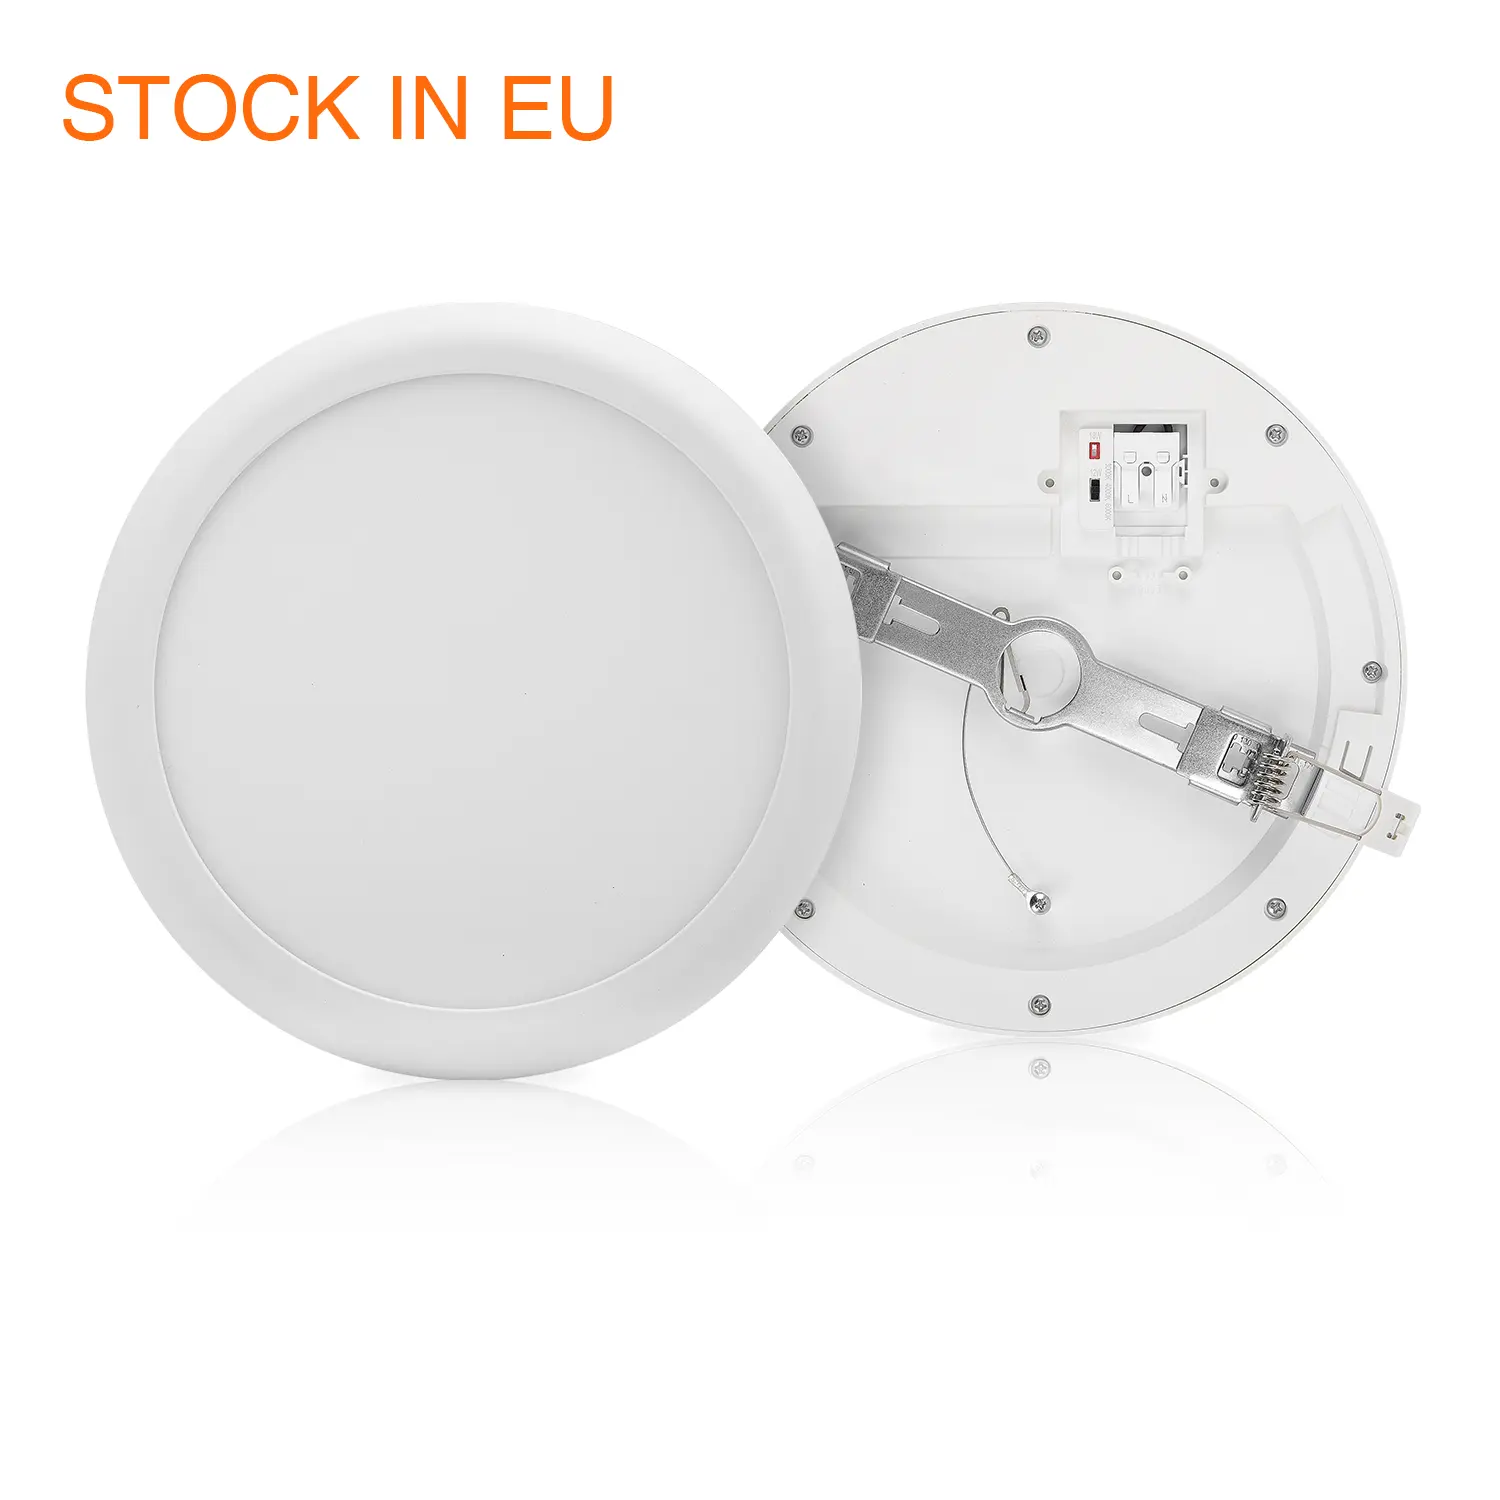 Inventory In Germany Pc Home Office 3cct Modern 24w 18w Aluminum Round Led Ceiling Panel Light